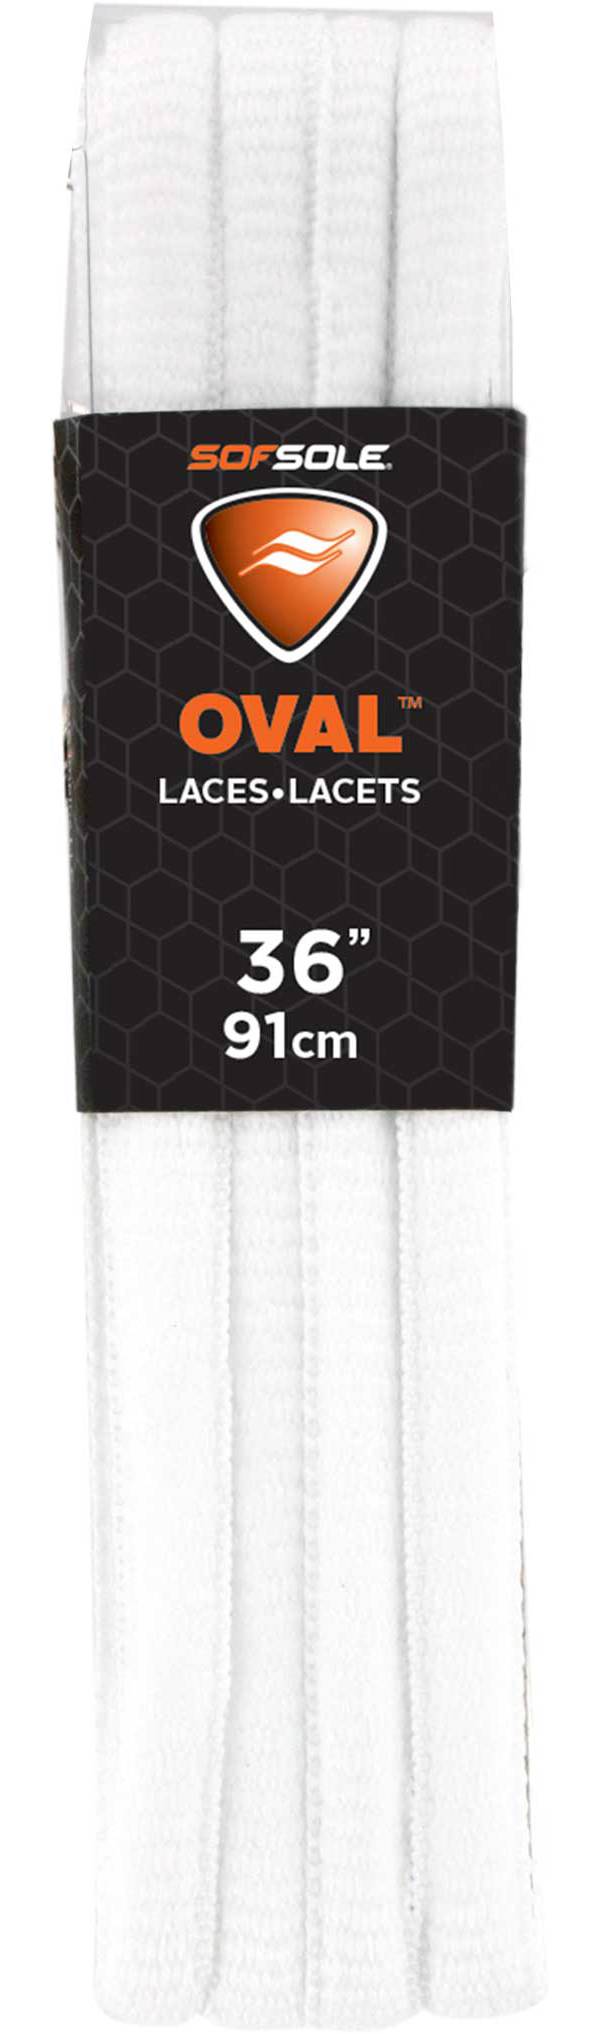 Sof Sole 36'' Oval Shoe Laces product image